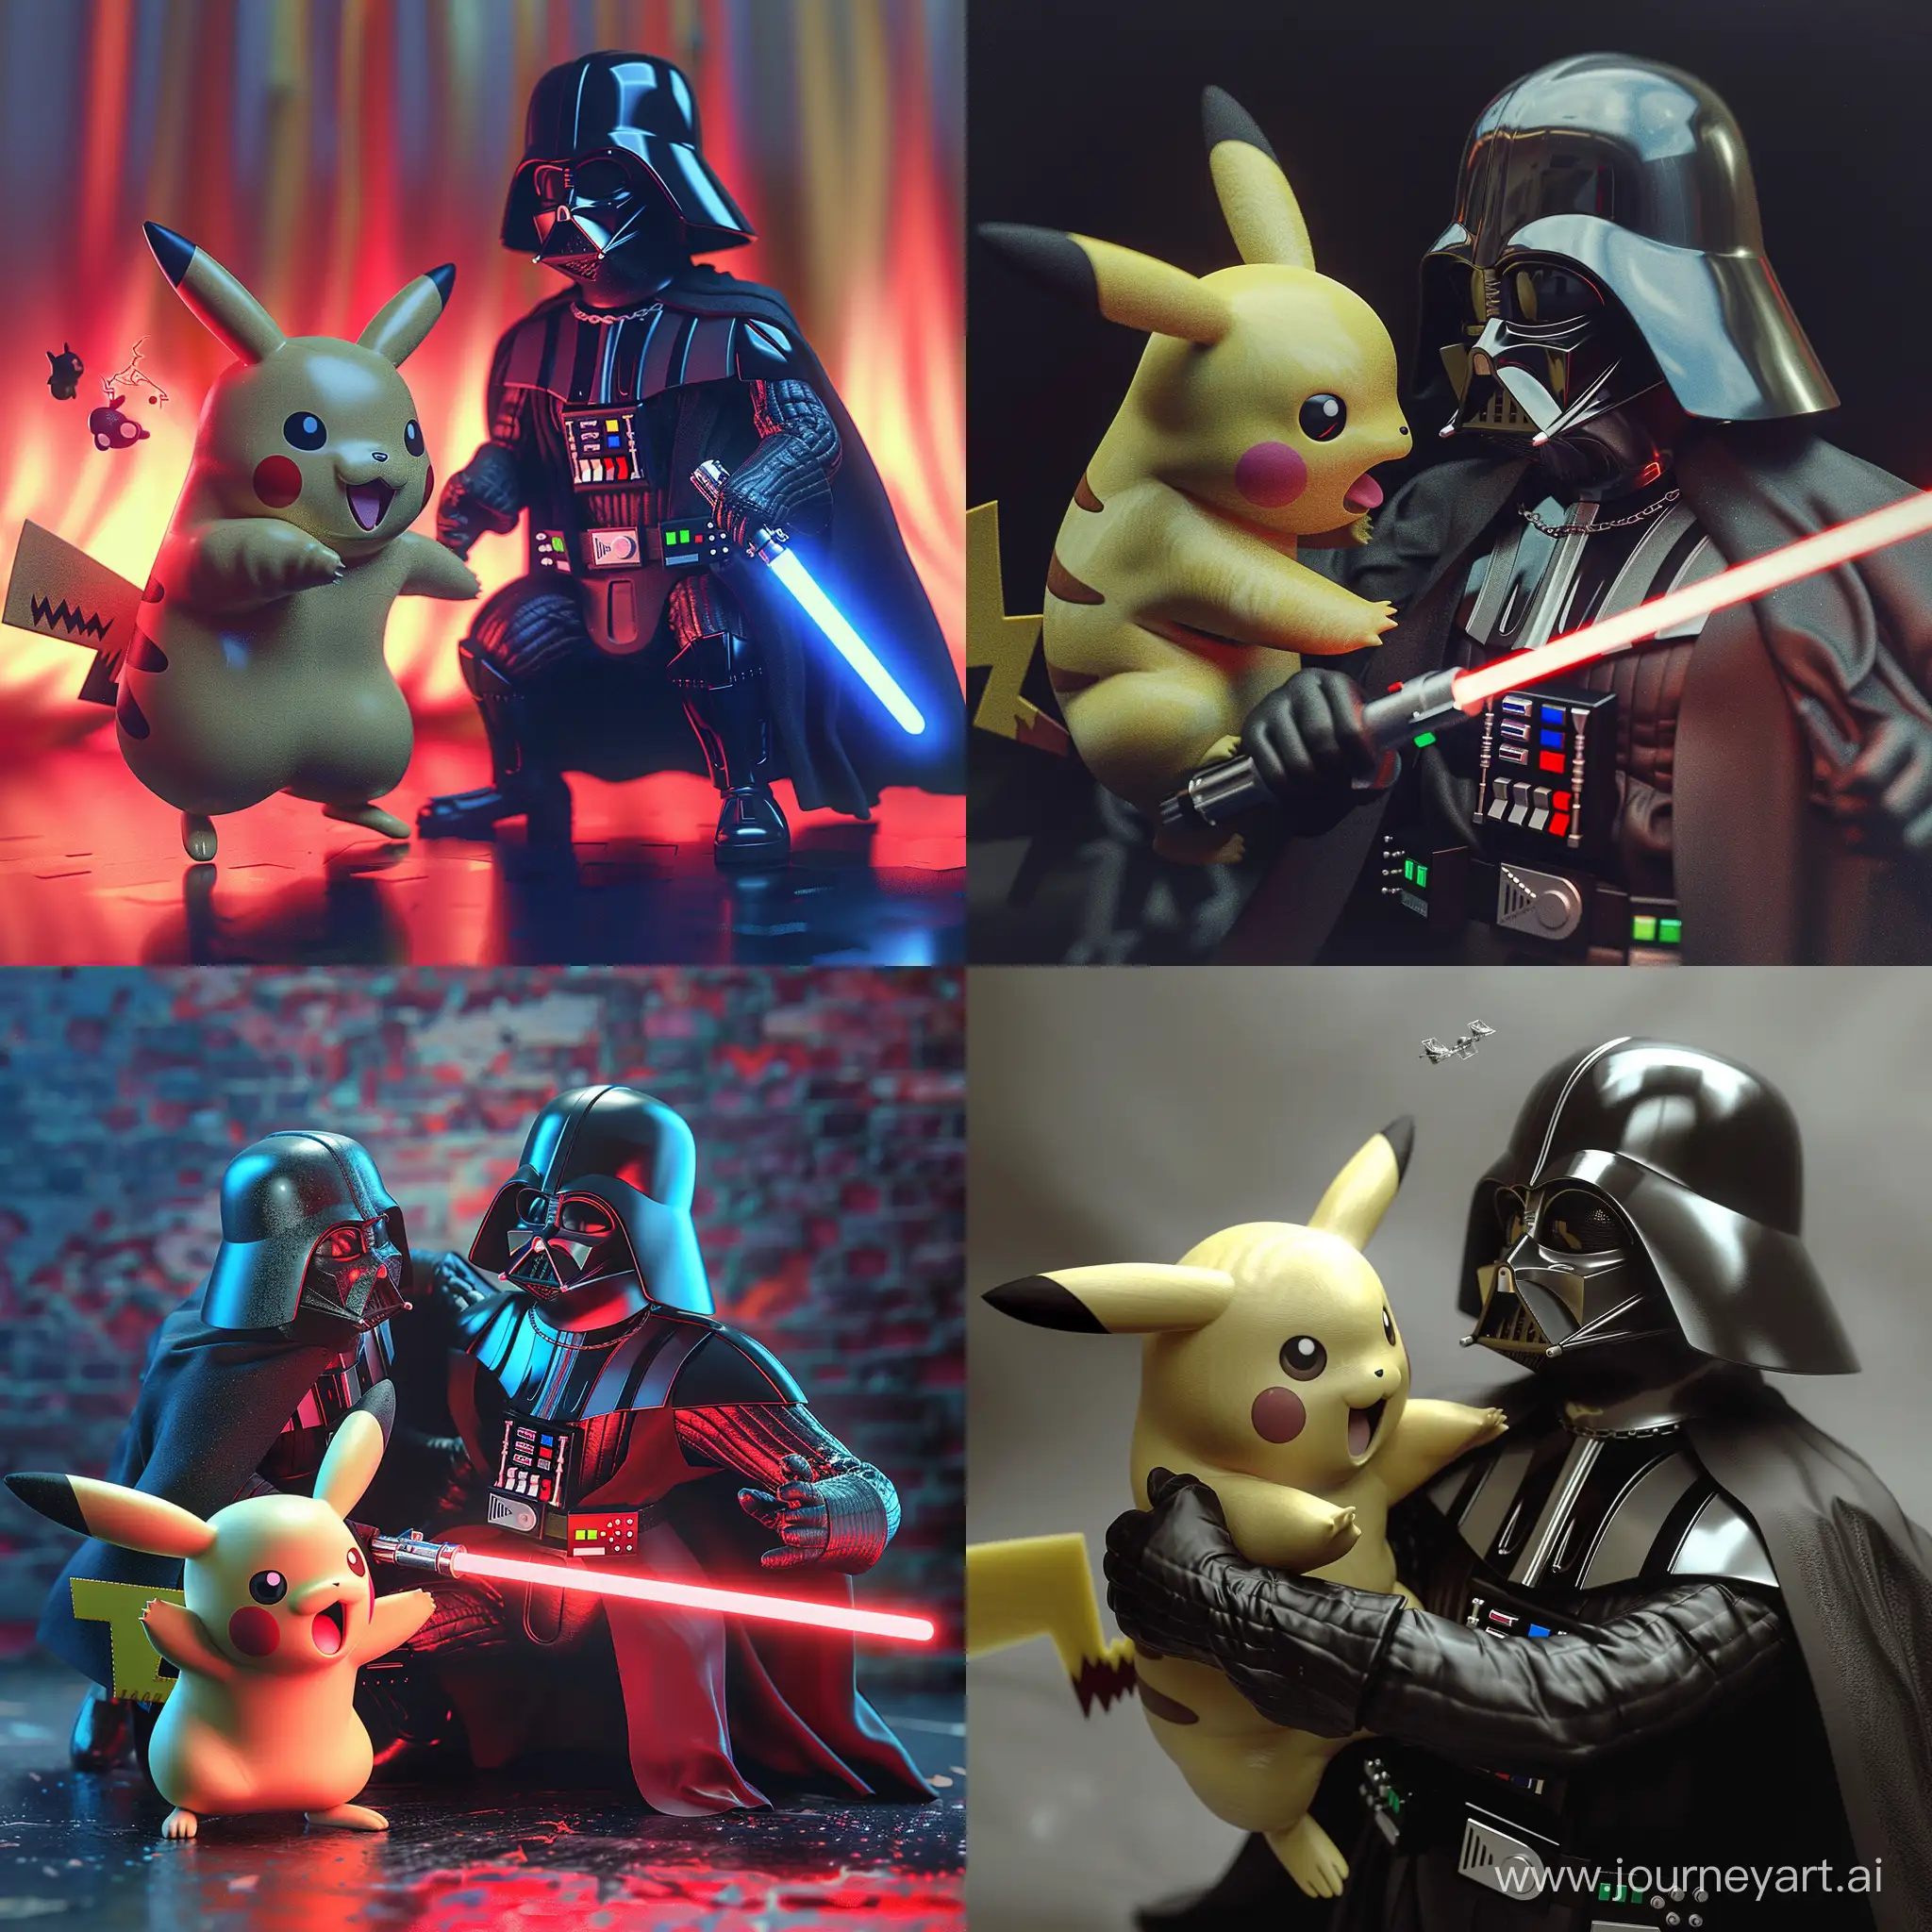 Pikachu and Darth Vader, fighting ,Ultra Realistic,Highly Detailed , Natural Lighting,